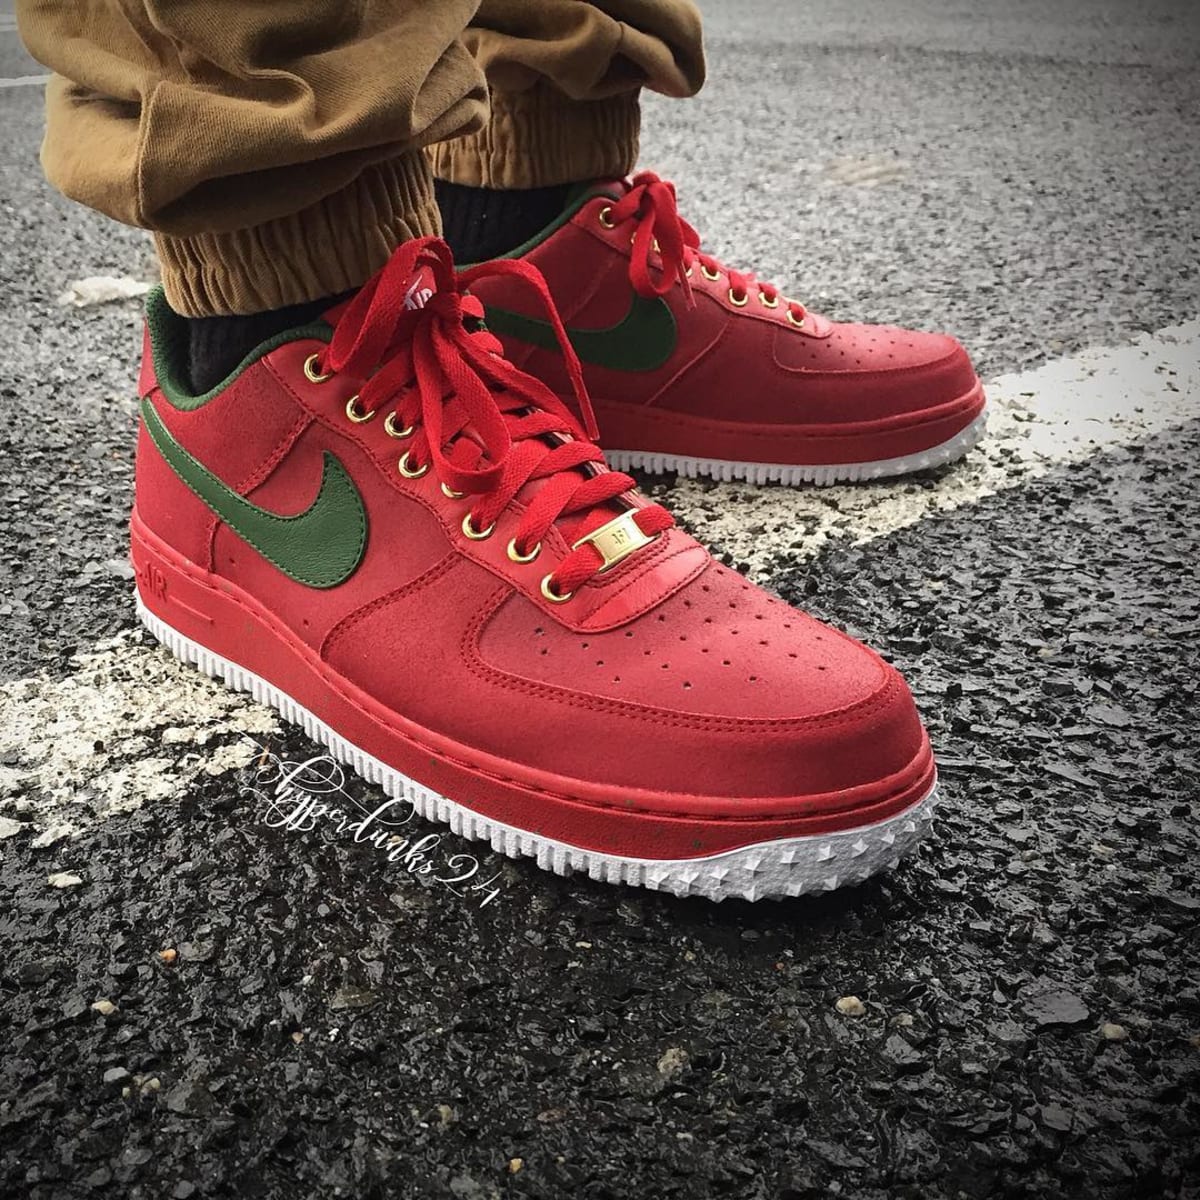 NIKEiD Air Force 1 Low Christmas - Christmas Nike By You NIKEiD Designs